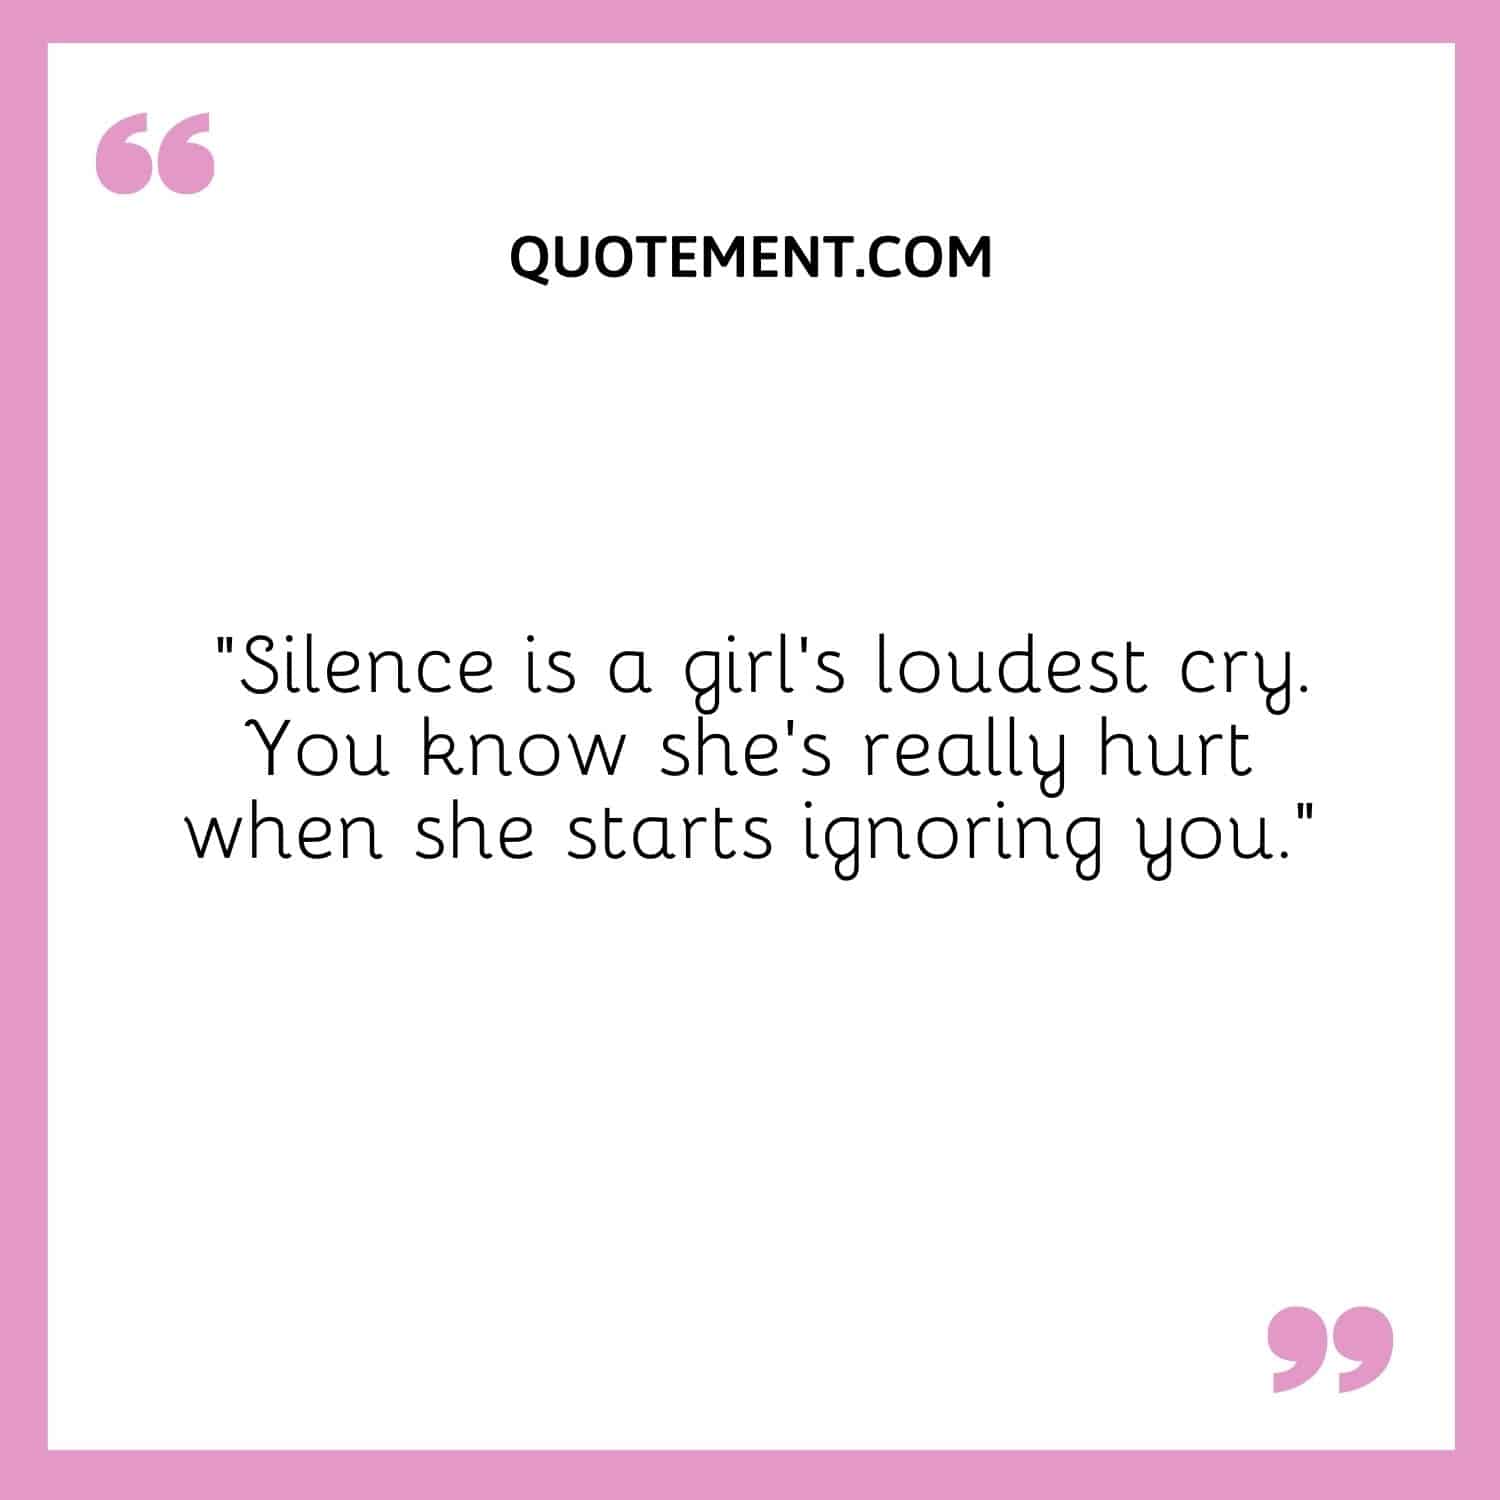 “Silence is a girl's loudest cry. You know she’s really hurt when she starts ignoring you.”